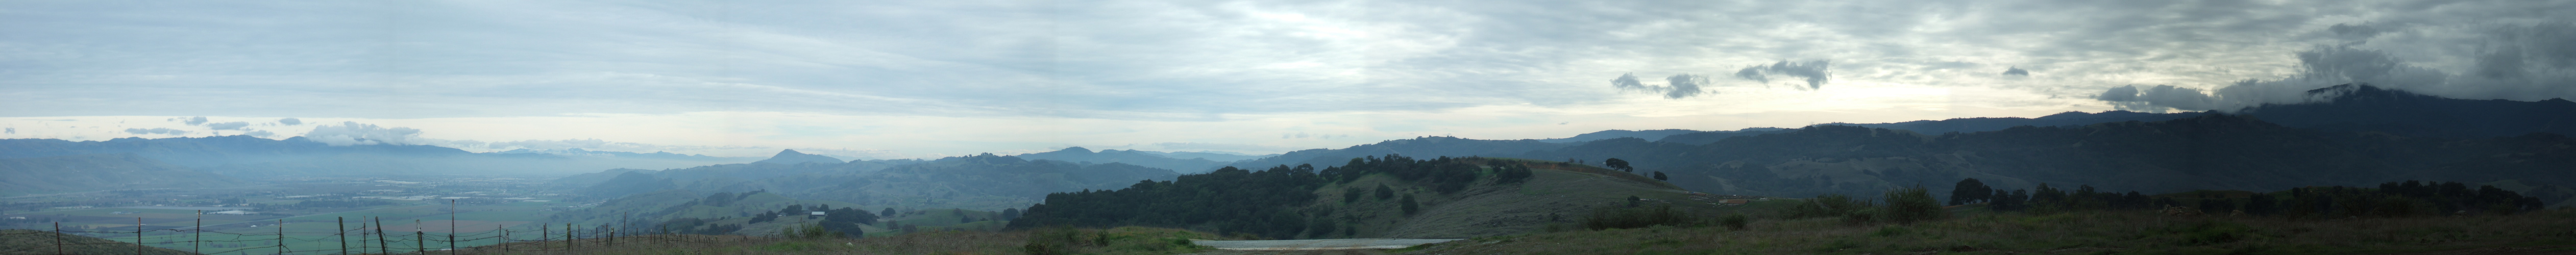 Santa Clara Valley from top of Countryview Drive.